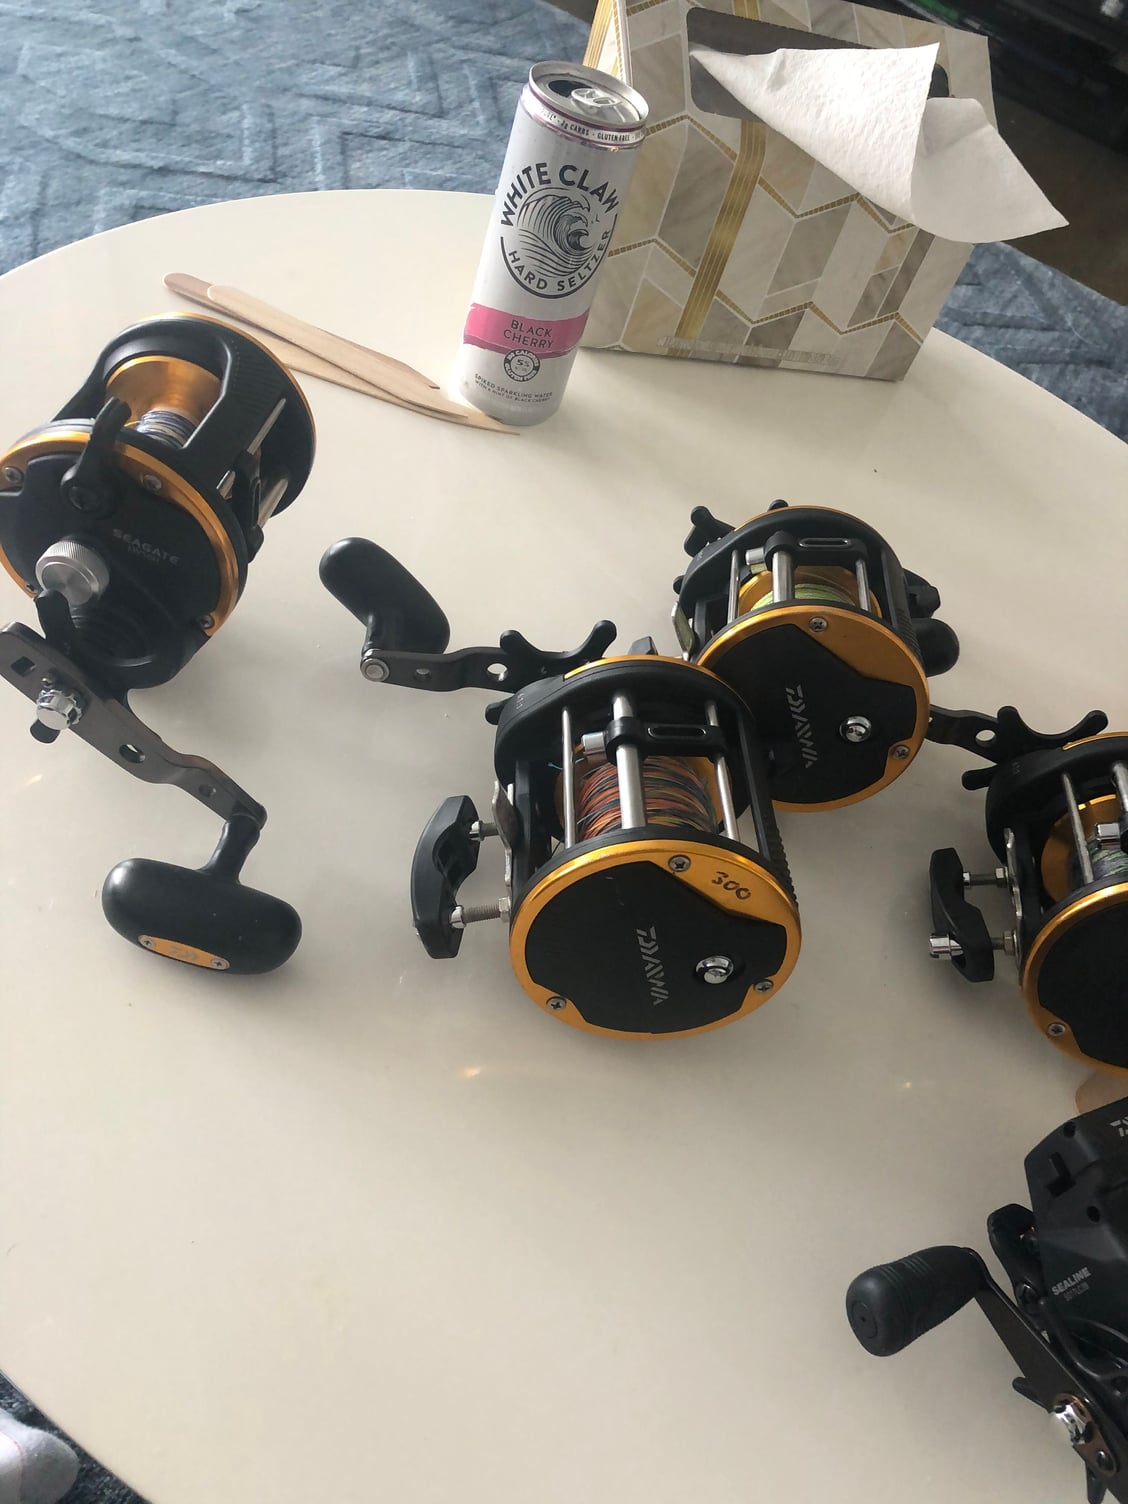 daiwa conventional reels - The Hull Truth - Boating and Fishing Forum